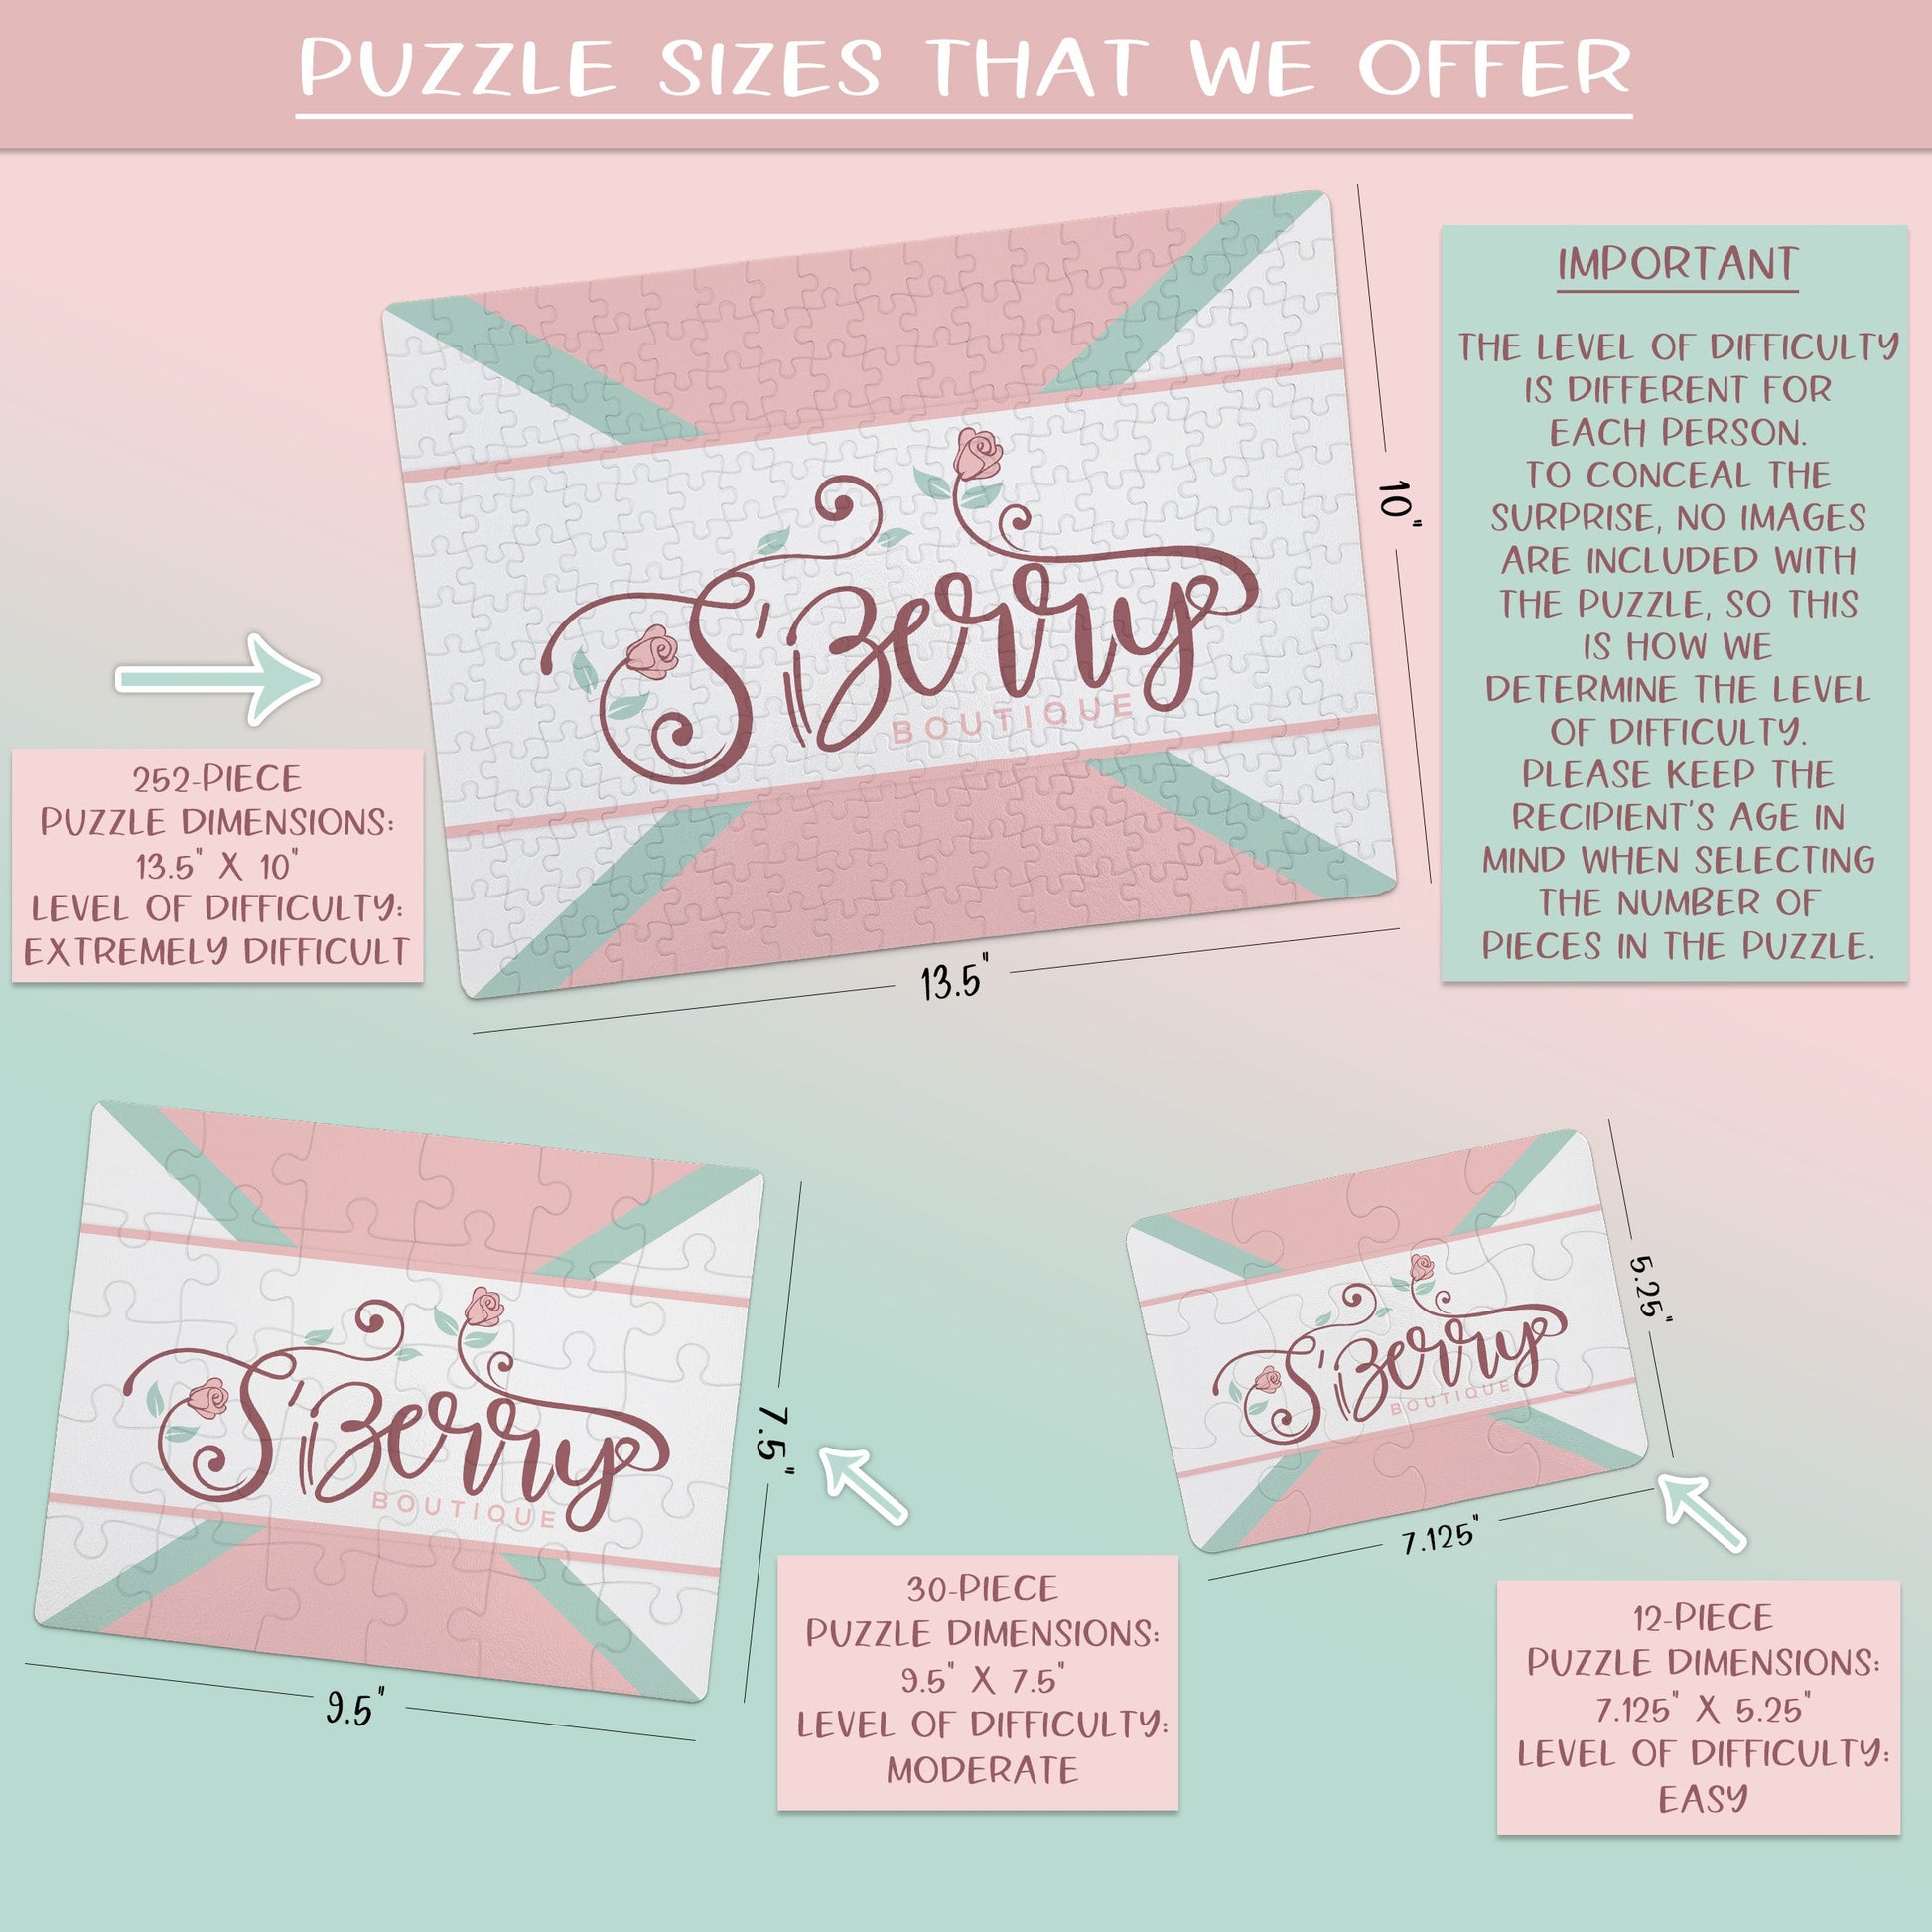 Create Your Own Puzzle - Arrow Design - CYOP0235 | S'Berry Boutique